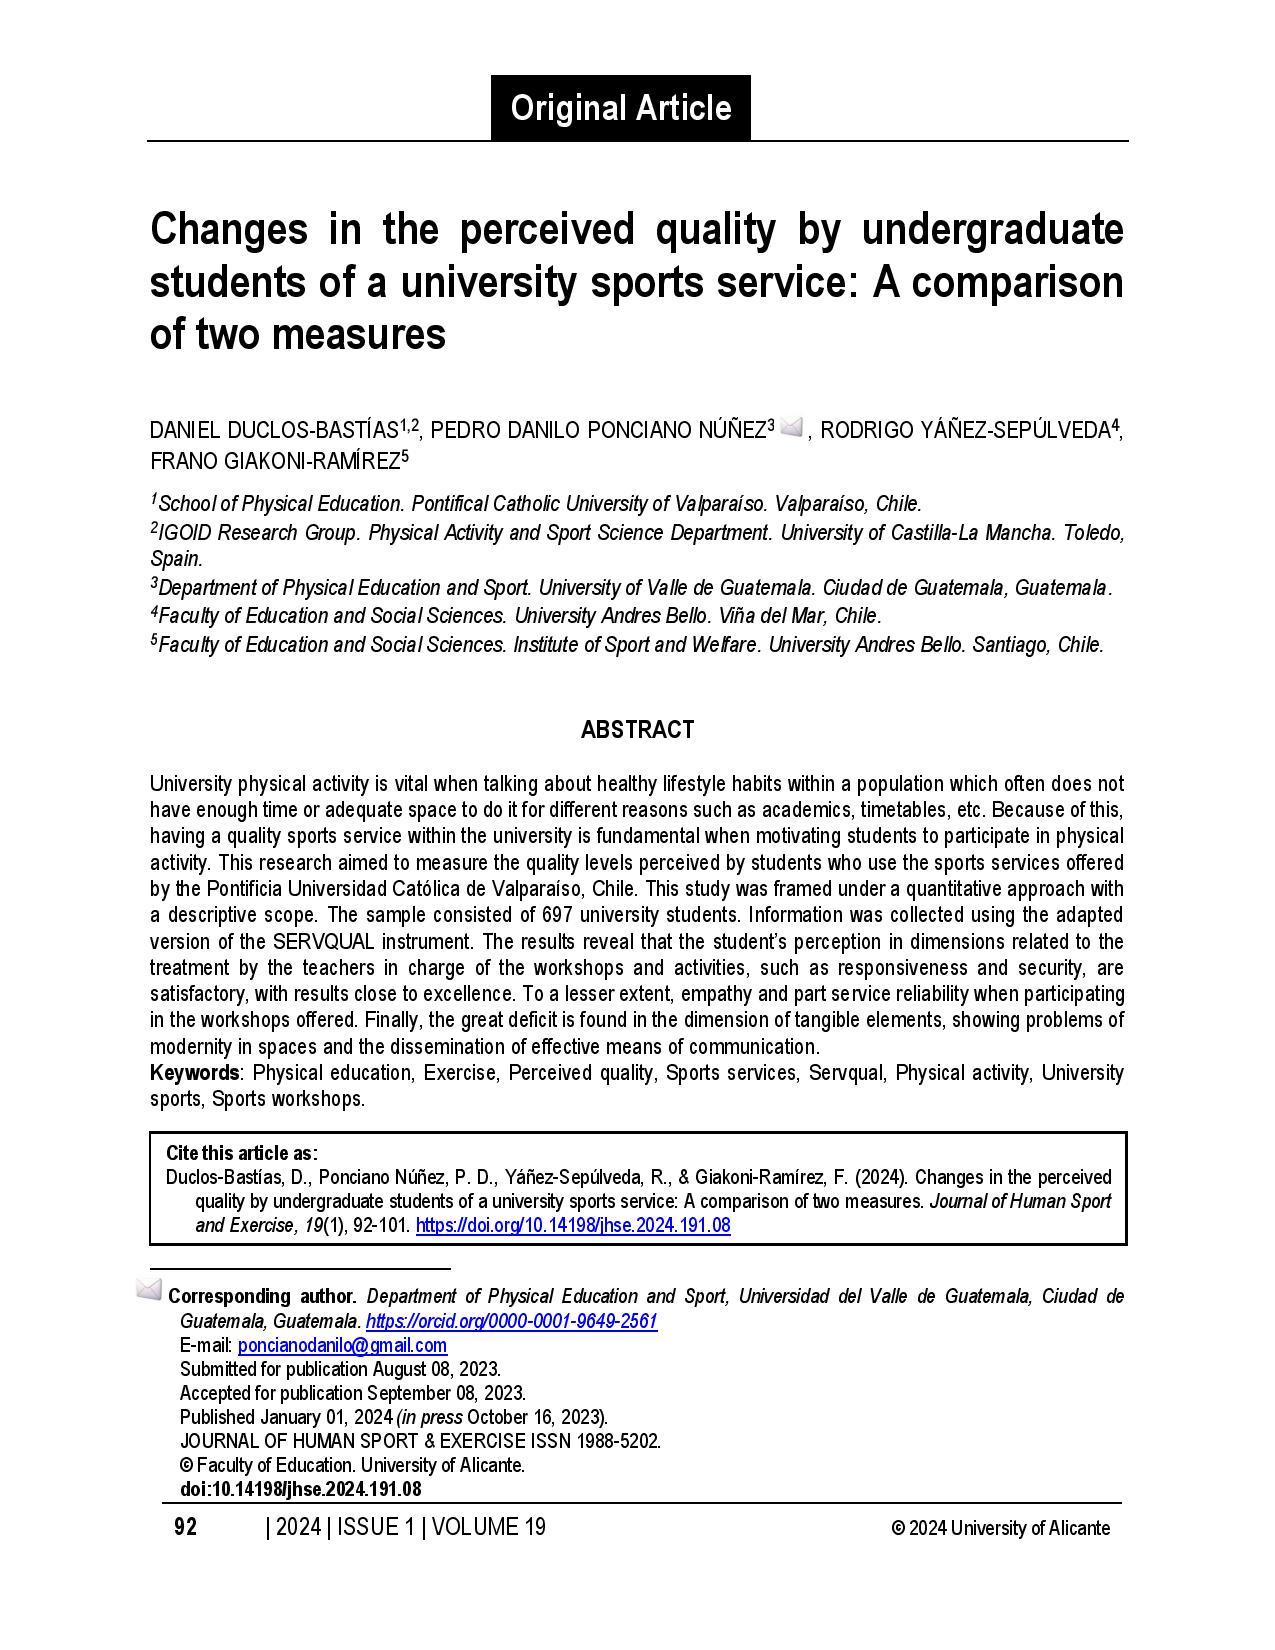 Changes in the perceived quality by undergraduate students of a university sports service: A comparison of two measures